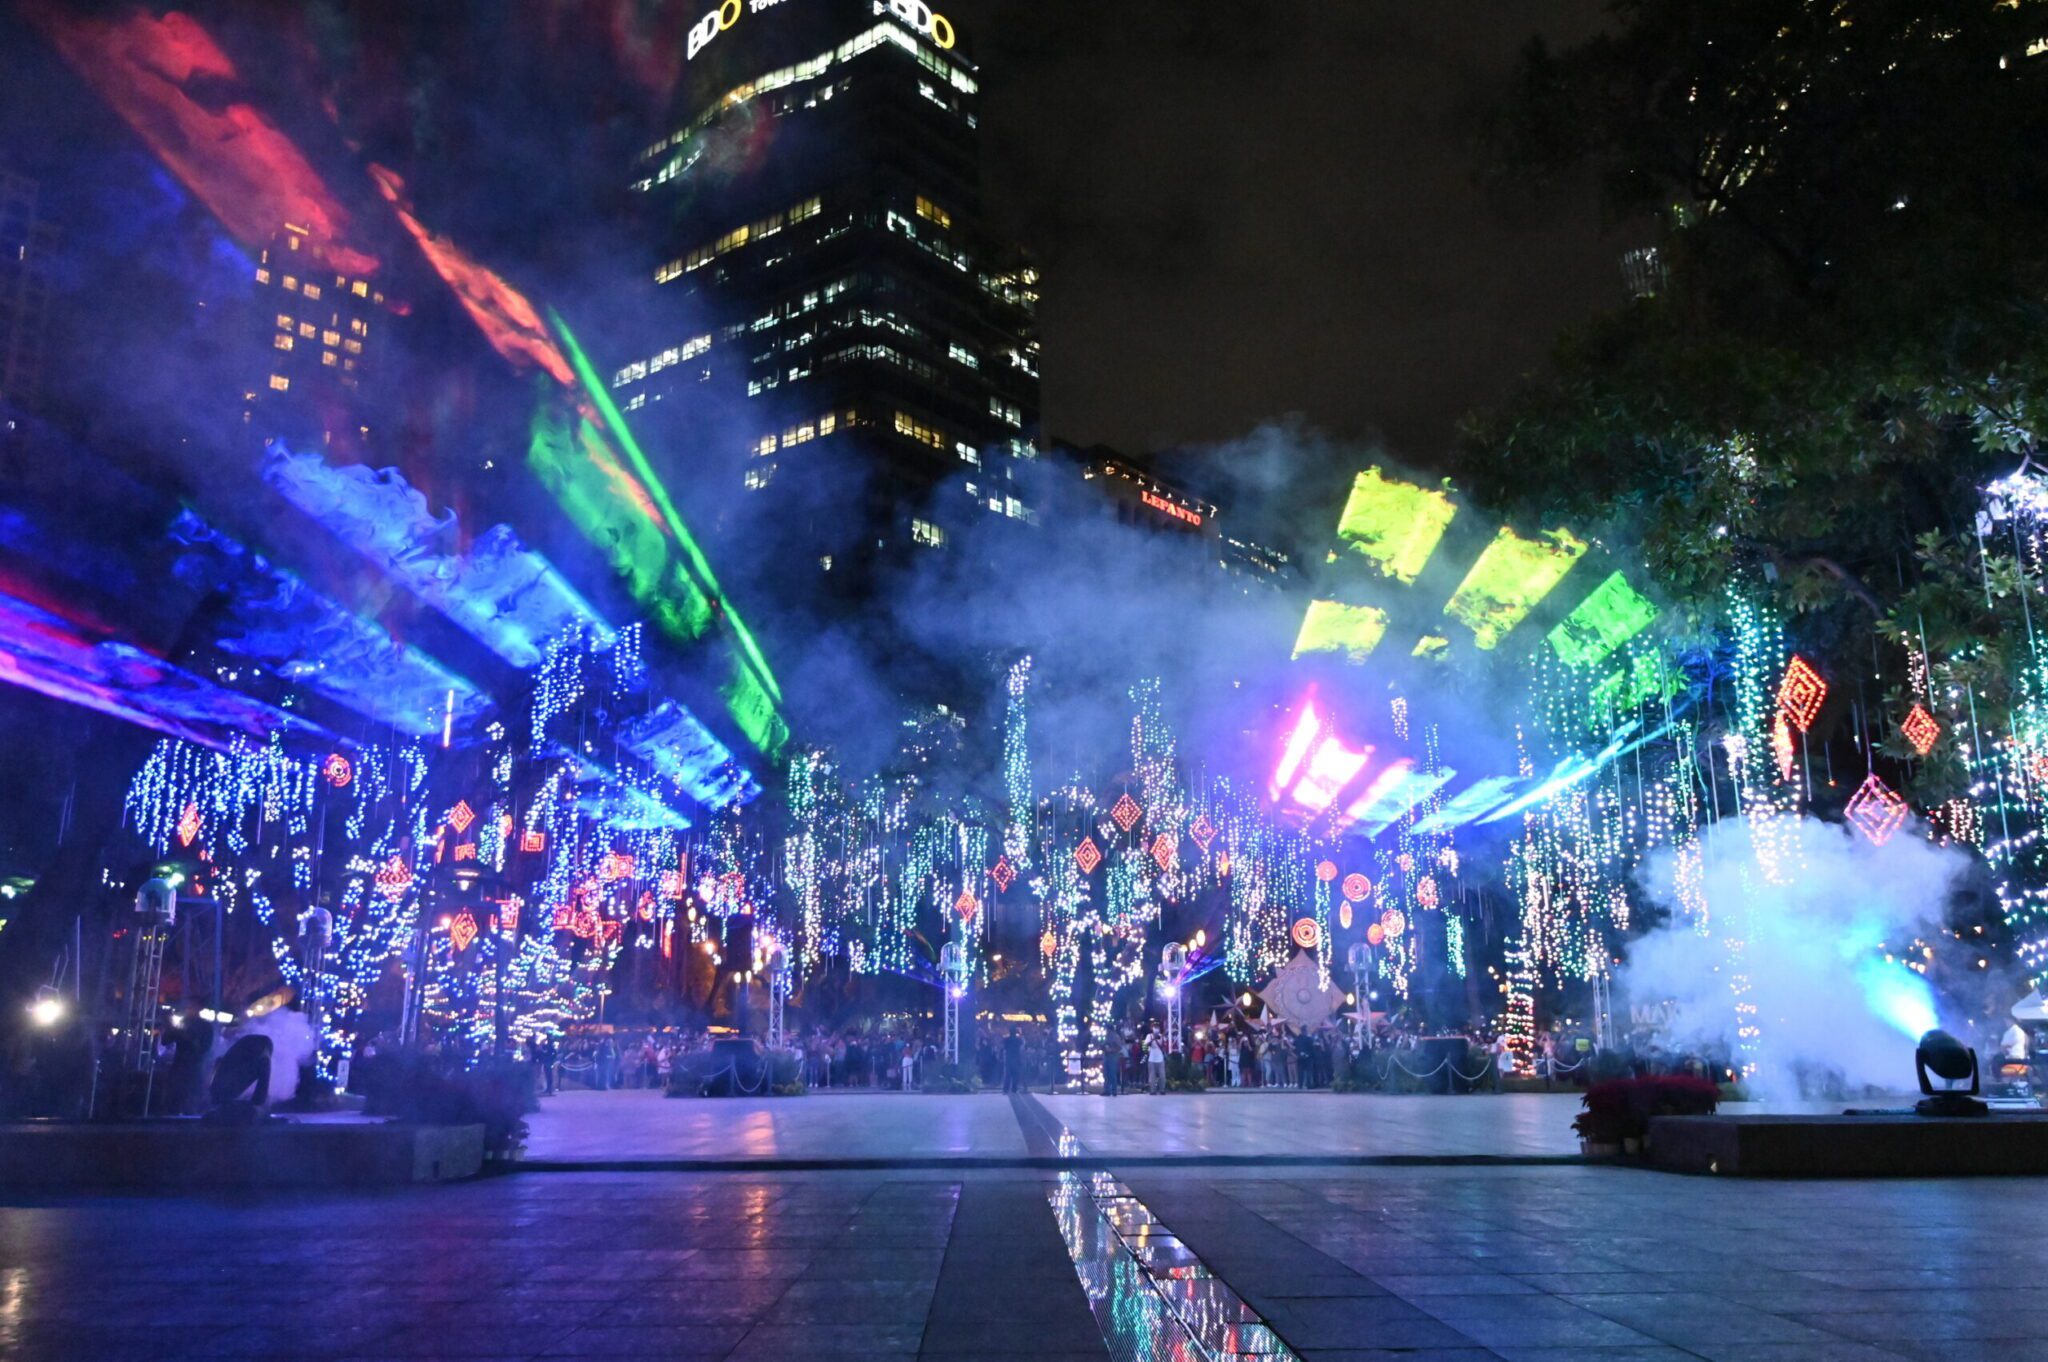 Festival of Lights Is Back Live and OnGround at Ayala Triangle Gardens